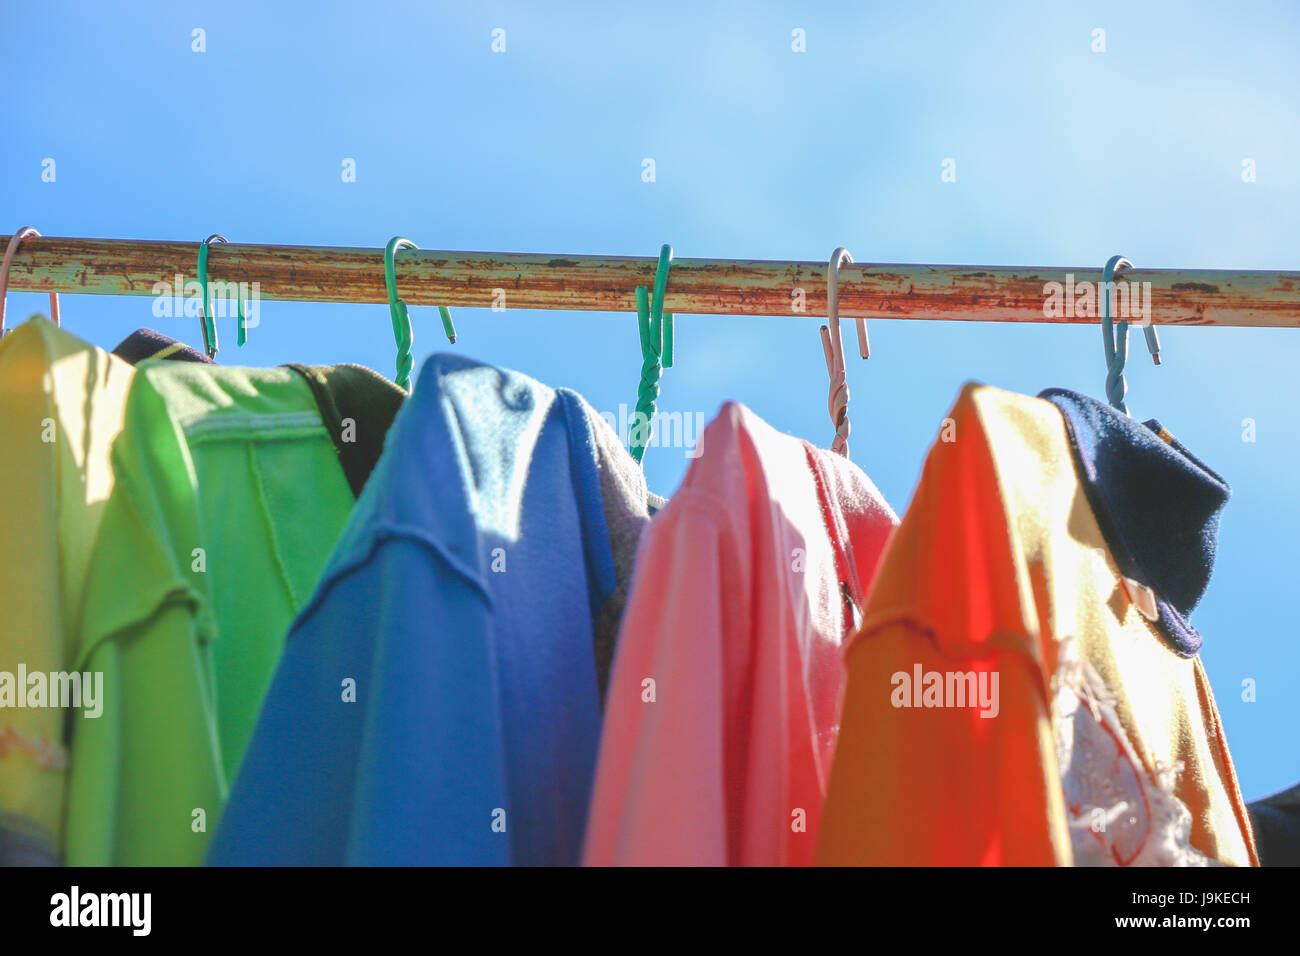 Dry cloths and T-Shirt, hang on the clothesline in sunny day. colorful t-shirt. Stock Photo